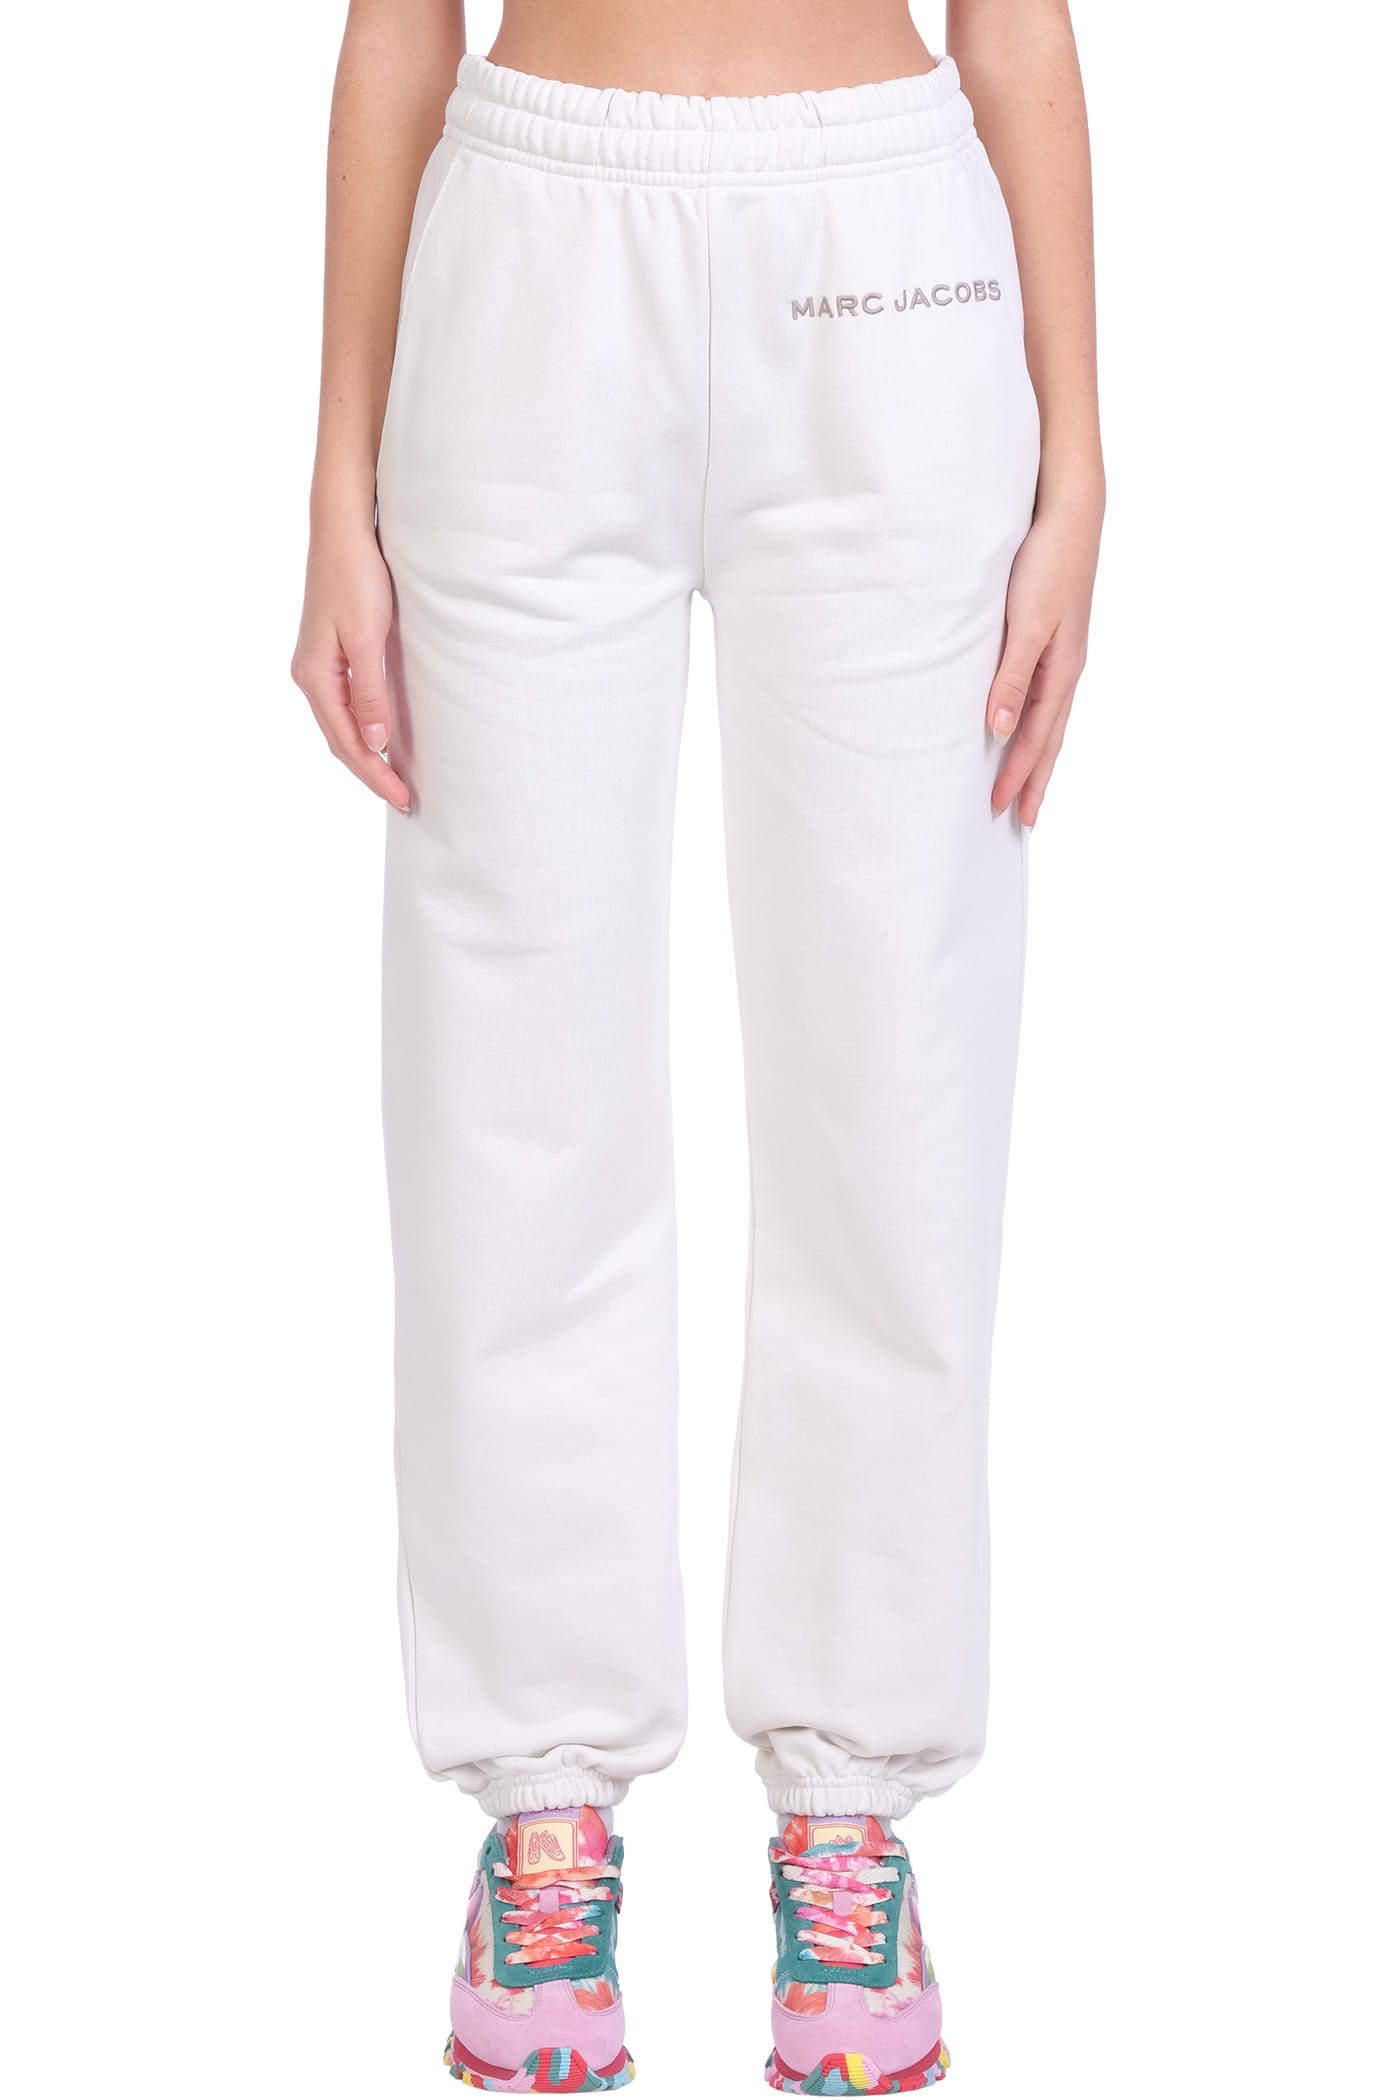 Marc Jacobs Pants In White Cotton